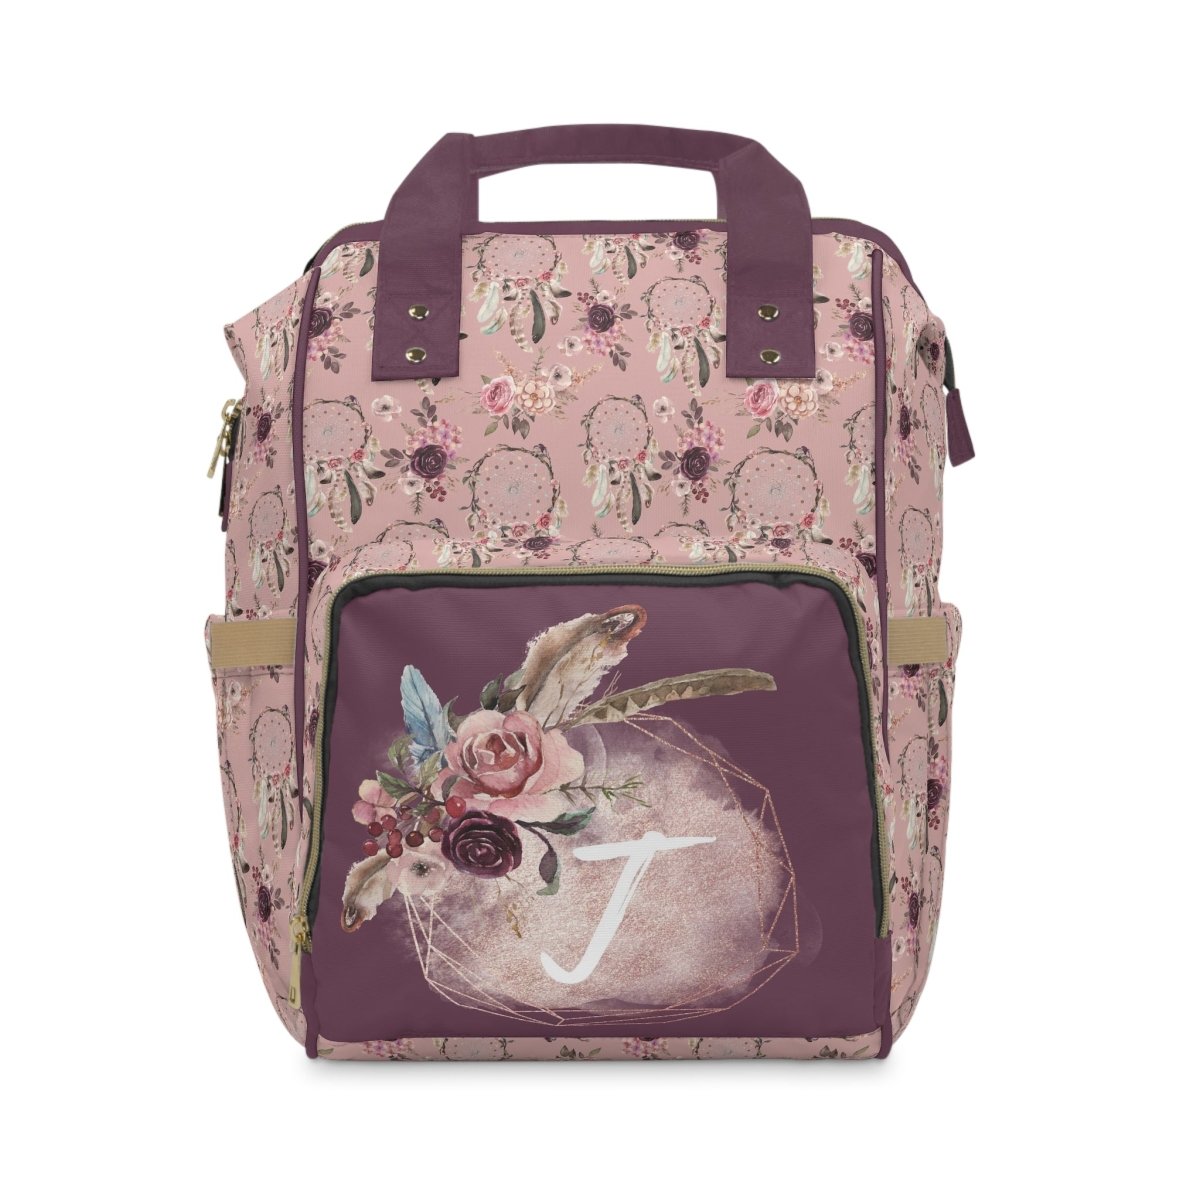 Floral Dreamcatcher Personalized Backpack Diaper Bag - Floral Dreamcatcher, gender_girl, text